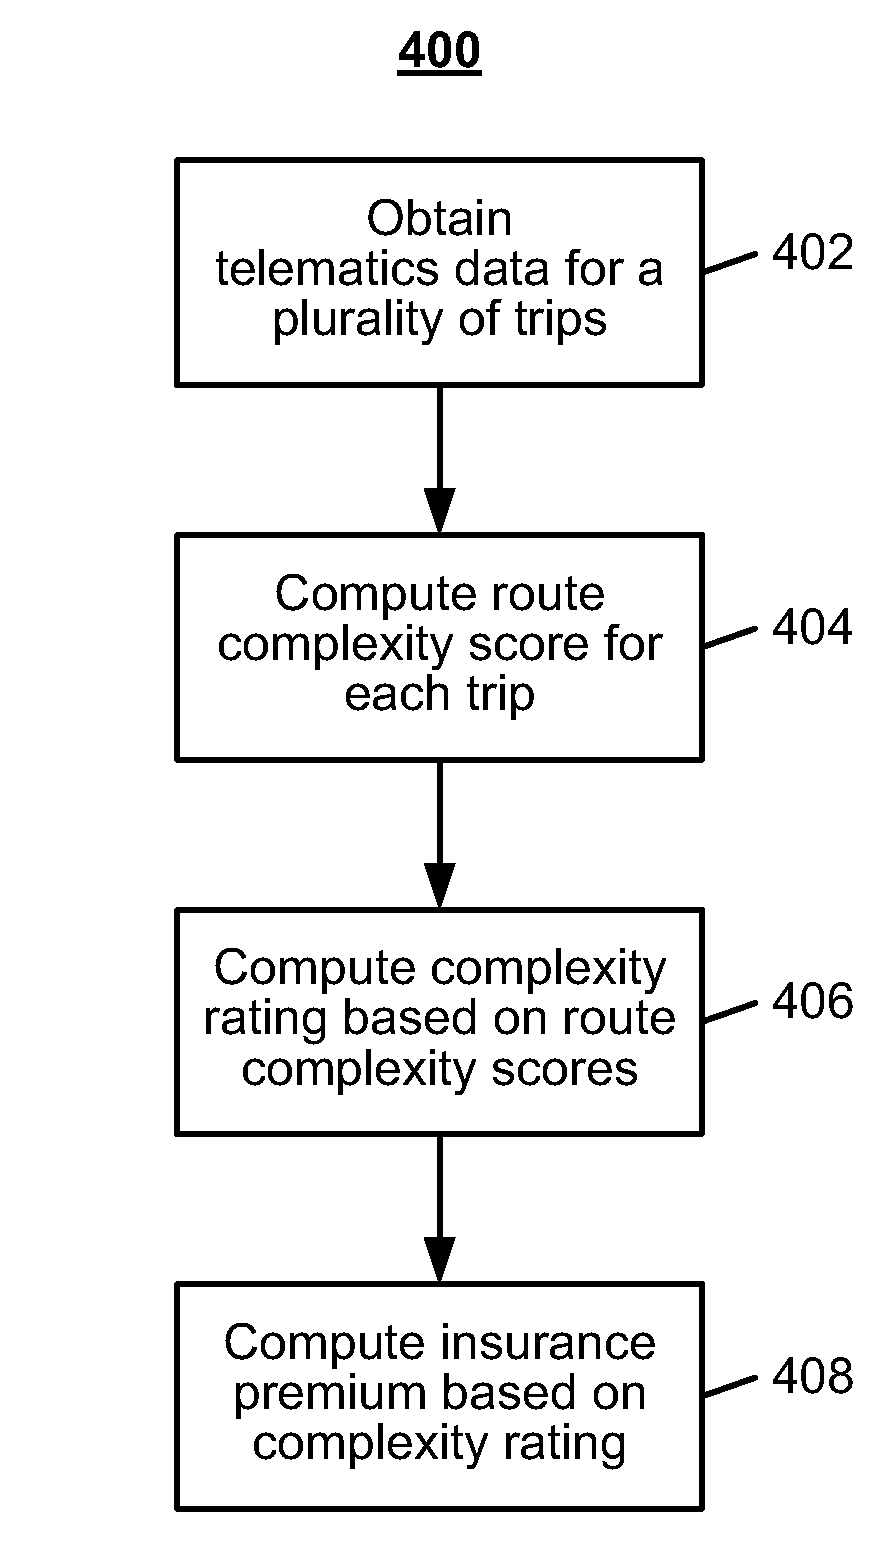 System and method for computing and scoring the complexity of a vehicle trip using geo-spatial information